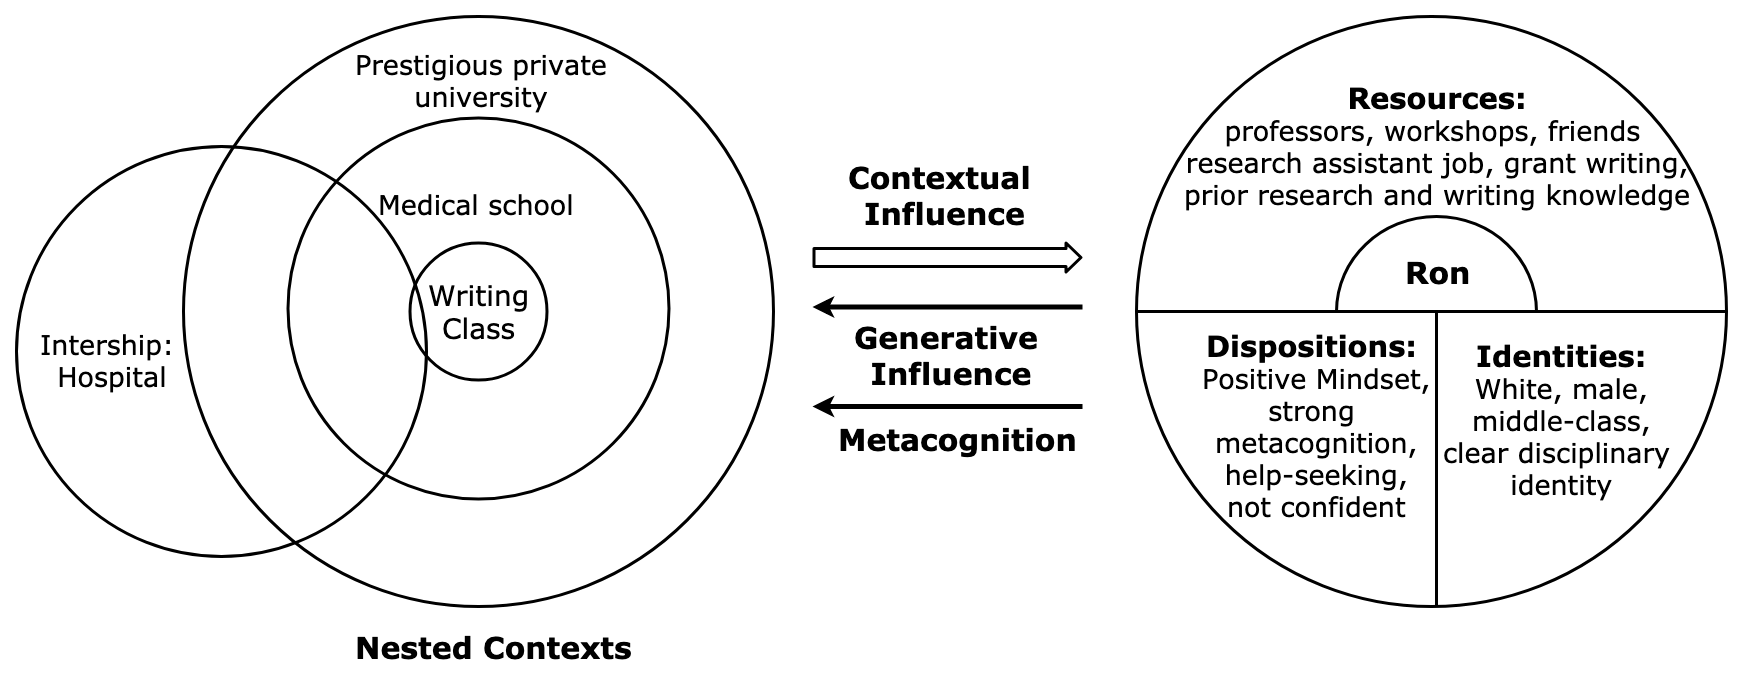 This figure shows Ron's developmental moments from Year 7 to Year 9. On the left are three nested circles that are marked with 'writing class,' 'medical school,' and 'prestigious private university'; in addition, a circle overlaps with the three rings of circles above, representing 'internship: hospital.' On the right is a circle that represents the person. Specifically in the person circle, a half circle in the center represents the core and is marked with 'Ron'; the upper half-circle ring is marked as 'Resources: Professors, workshops, friends, research assistant job, grant writing, prior research and writing knowledge'; the lower half of the person circle is divided equally into two halves, one is marked with 'Dispositions: Positive mindset, strong metacognition, help-seeking, not confident' and the other with 'Identities: White, male, middle-class, clear disciplinary identity.' Between the nested contexts circles and the person circle are three arrows. On the top is an arrow pointing at the right, with 'Contextual Influence' written above it; in the middle is an arrow pointing at the left, with 'Generative Influence' written beneath it; on the bottom is an arrow pointing at the left, with 'Metacognition' written beneath it.